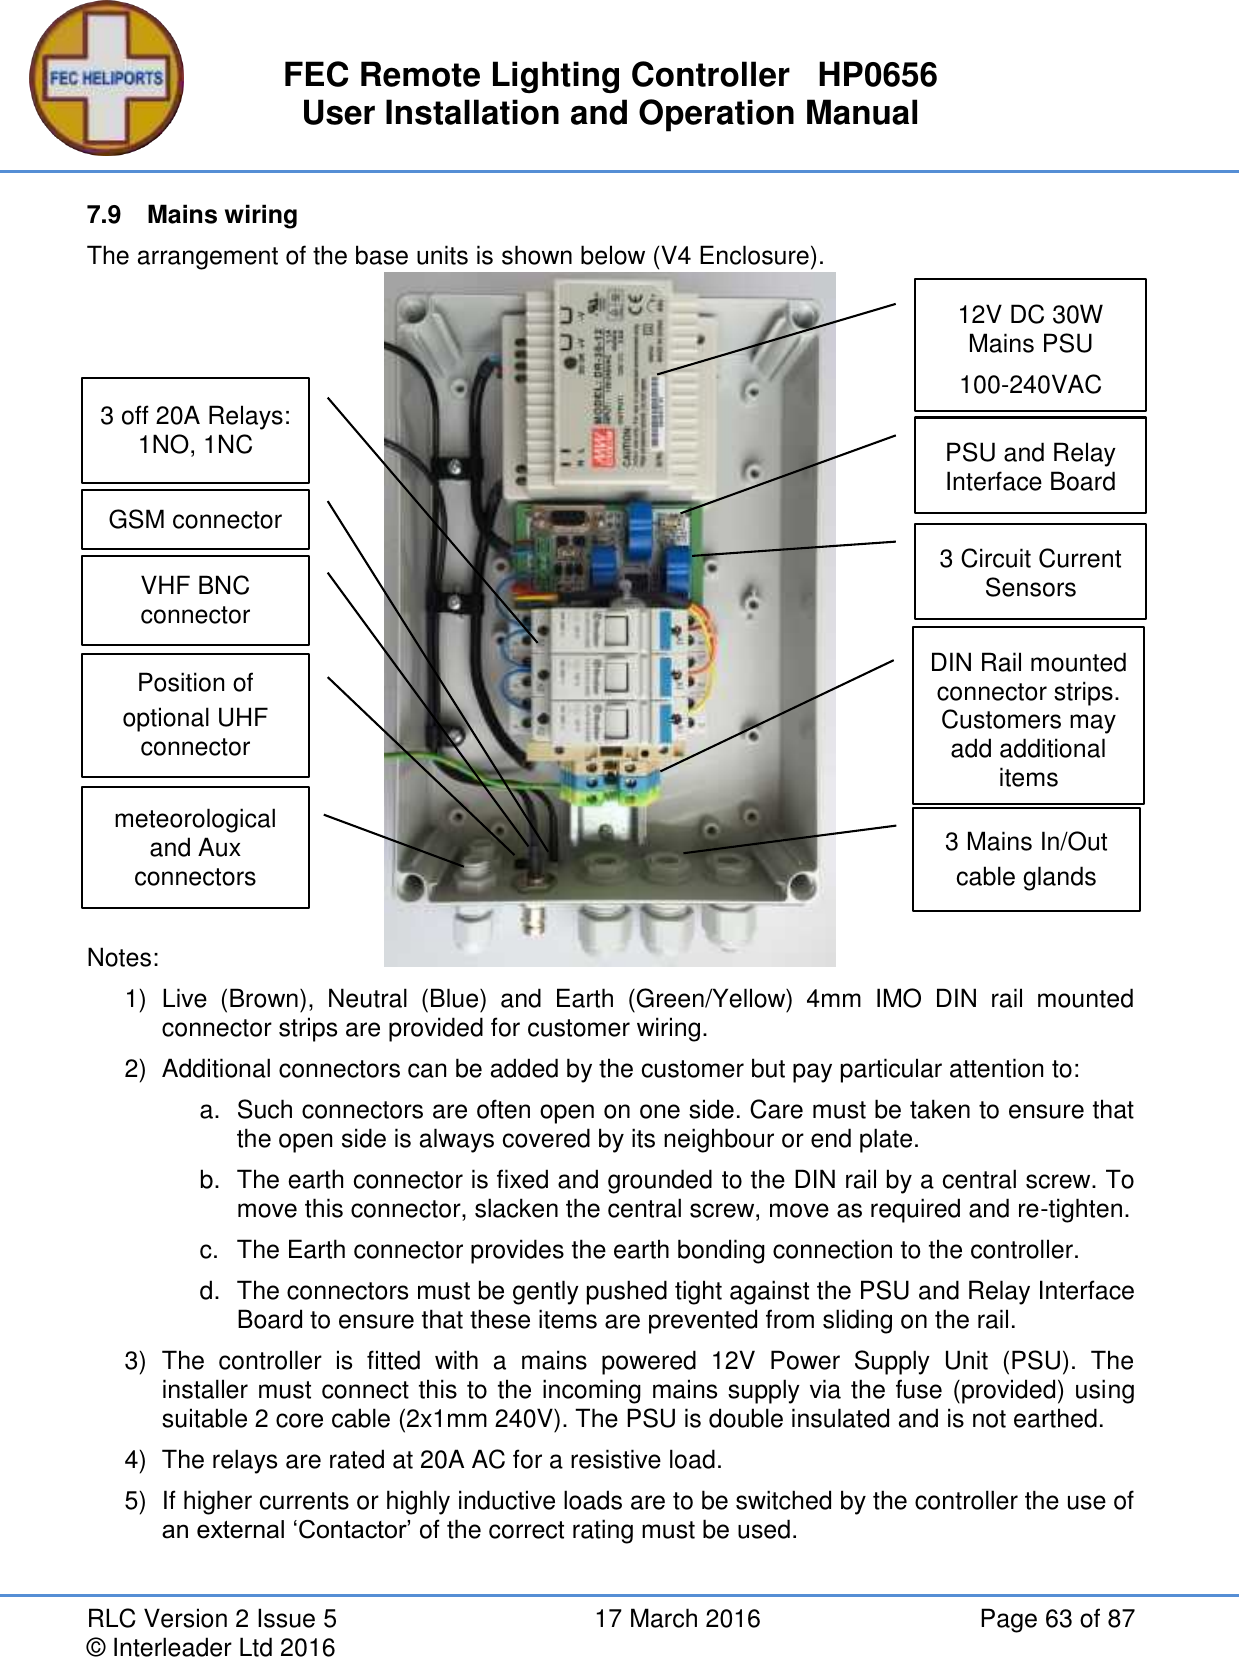 FEC Remote Lighting Controller   HP0656 User Installation and Operation Manual RLC Version 2 Issue 5  17 March 2016  Page 63 of 87 © Interleader Ltd 2016 7.9  Mains wiring The arrangement of the base units is shown below (V4 Enclosure).                 Notes: 1)  Live  (Brown),  Neutral  (Blue)  and  Earth  (Green/Yellow)  4mm  IMO  DIN  rail  mounted connector strips are provided for customer wiring. 2)  Additional connectors can be added by the customer but pay particular attention to: a.  Such connectors are often open on one side. Care must be taken to ensure that the open side is always covered by its neighbour or end plate. b.  The earth connector is fixed and grounded to the DIN rail by a central screw. To move this connector, slacken the central screw, move as required and re-tighten. c.  The Earth connector provides the earth bonding connection to the controller. d.  The connectors must be gently pushed tight against the PSU and Relay Interface Board to ensure that these items are prevented from sliding on the rail. 3)  The  controller  is  fitted  with  a  mains  powered  12V  Power  Supply  Unit  (PSU).  The installer must connect this to the incoming mains supply via the fuse (provided) using suitable 2 core cable (2x1mm 240V). The PSU is double insulated and is not earthed. 4)  The relays are rated at 20A AC for a resistive load. 5)  If higher currents or highly inductive loads are to be switched by the controller the use of an external ‘Contactor’ of the correct rating must be used.    DIN Rail mounted connector strips. Customers may add additional items 12V DC 30W Mains PSU 100-240VAC PSU and Relay Interface Board meteorological and Aux  connectors  Position of optional UHF connector  VHF BNC connector 3 Mains In/Out cable glands 3 off 20A Relays: 1NO, 1NC GSM connector  3 Circuit Current Sensors 